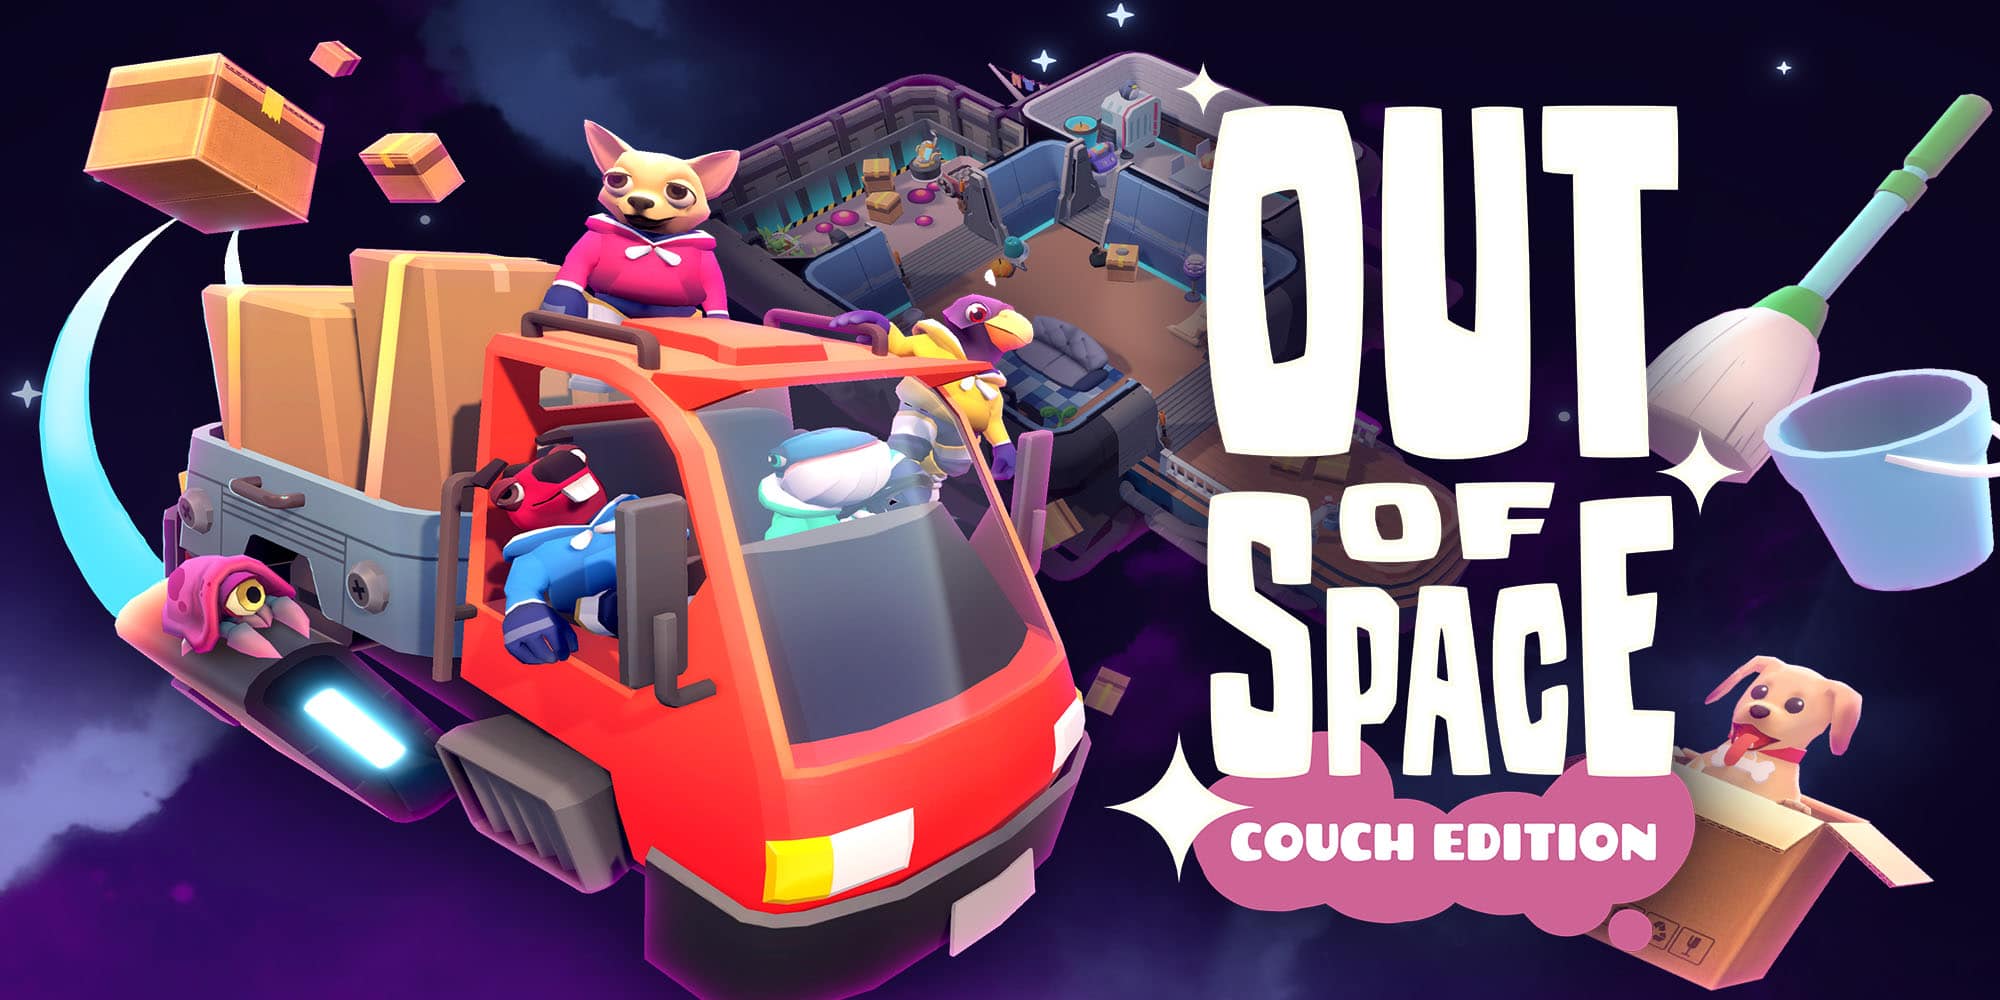 Out of Space: Couch Edition in arrivo il 25 novembre 6